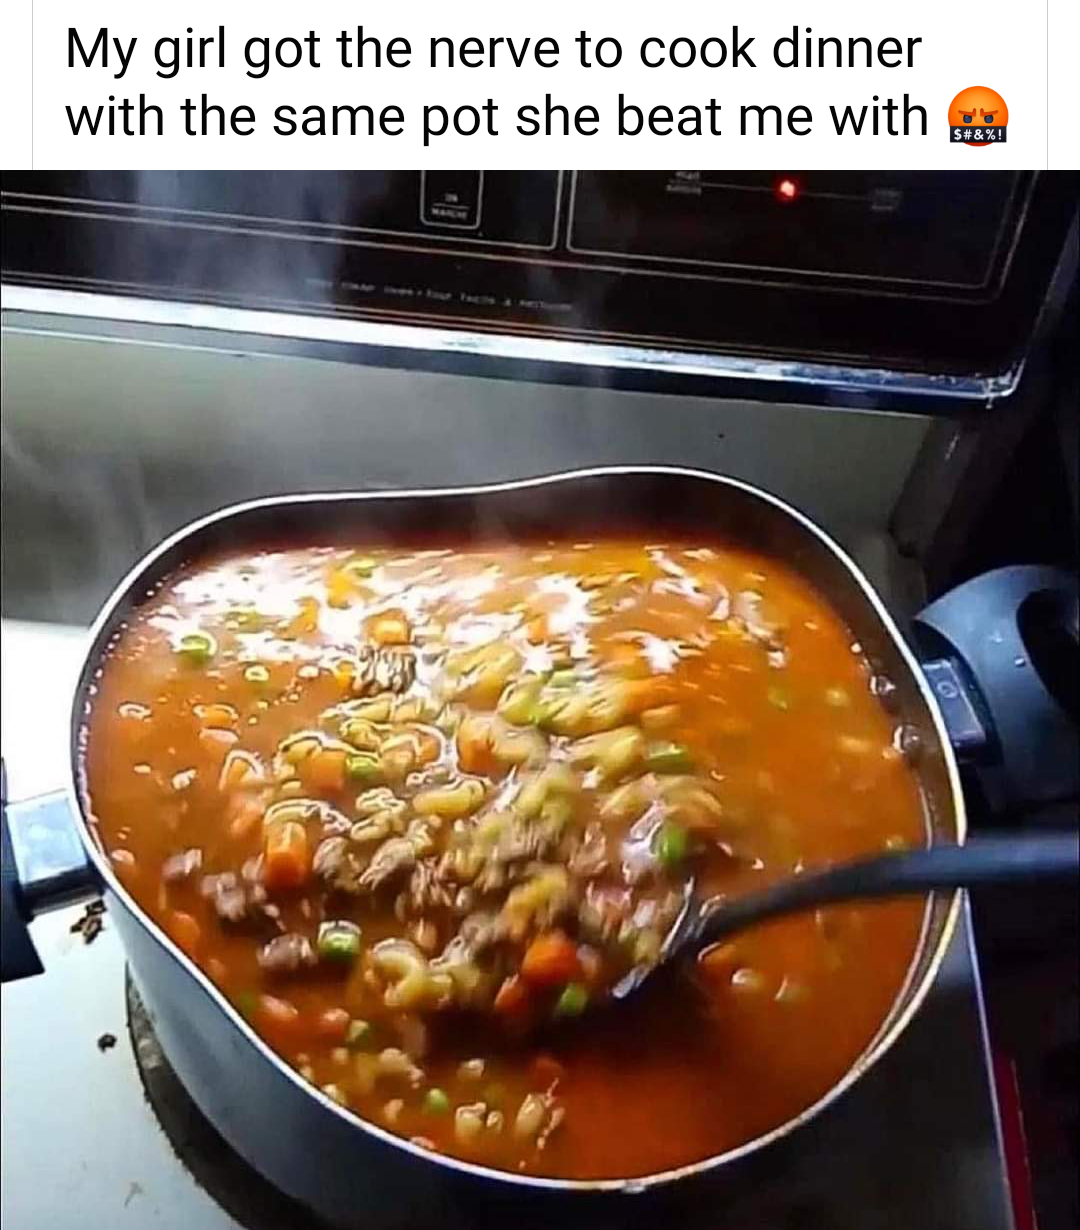 dank memes - my girl cooked dinner with the same pot she beat me with meme - My girl got the nerve to cook dinner with the same pot she beat me with